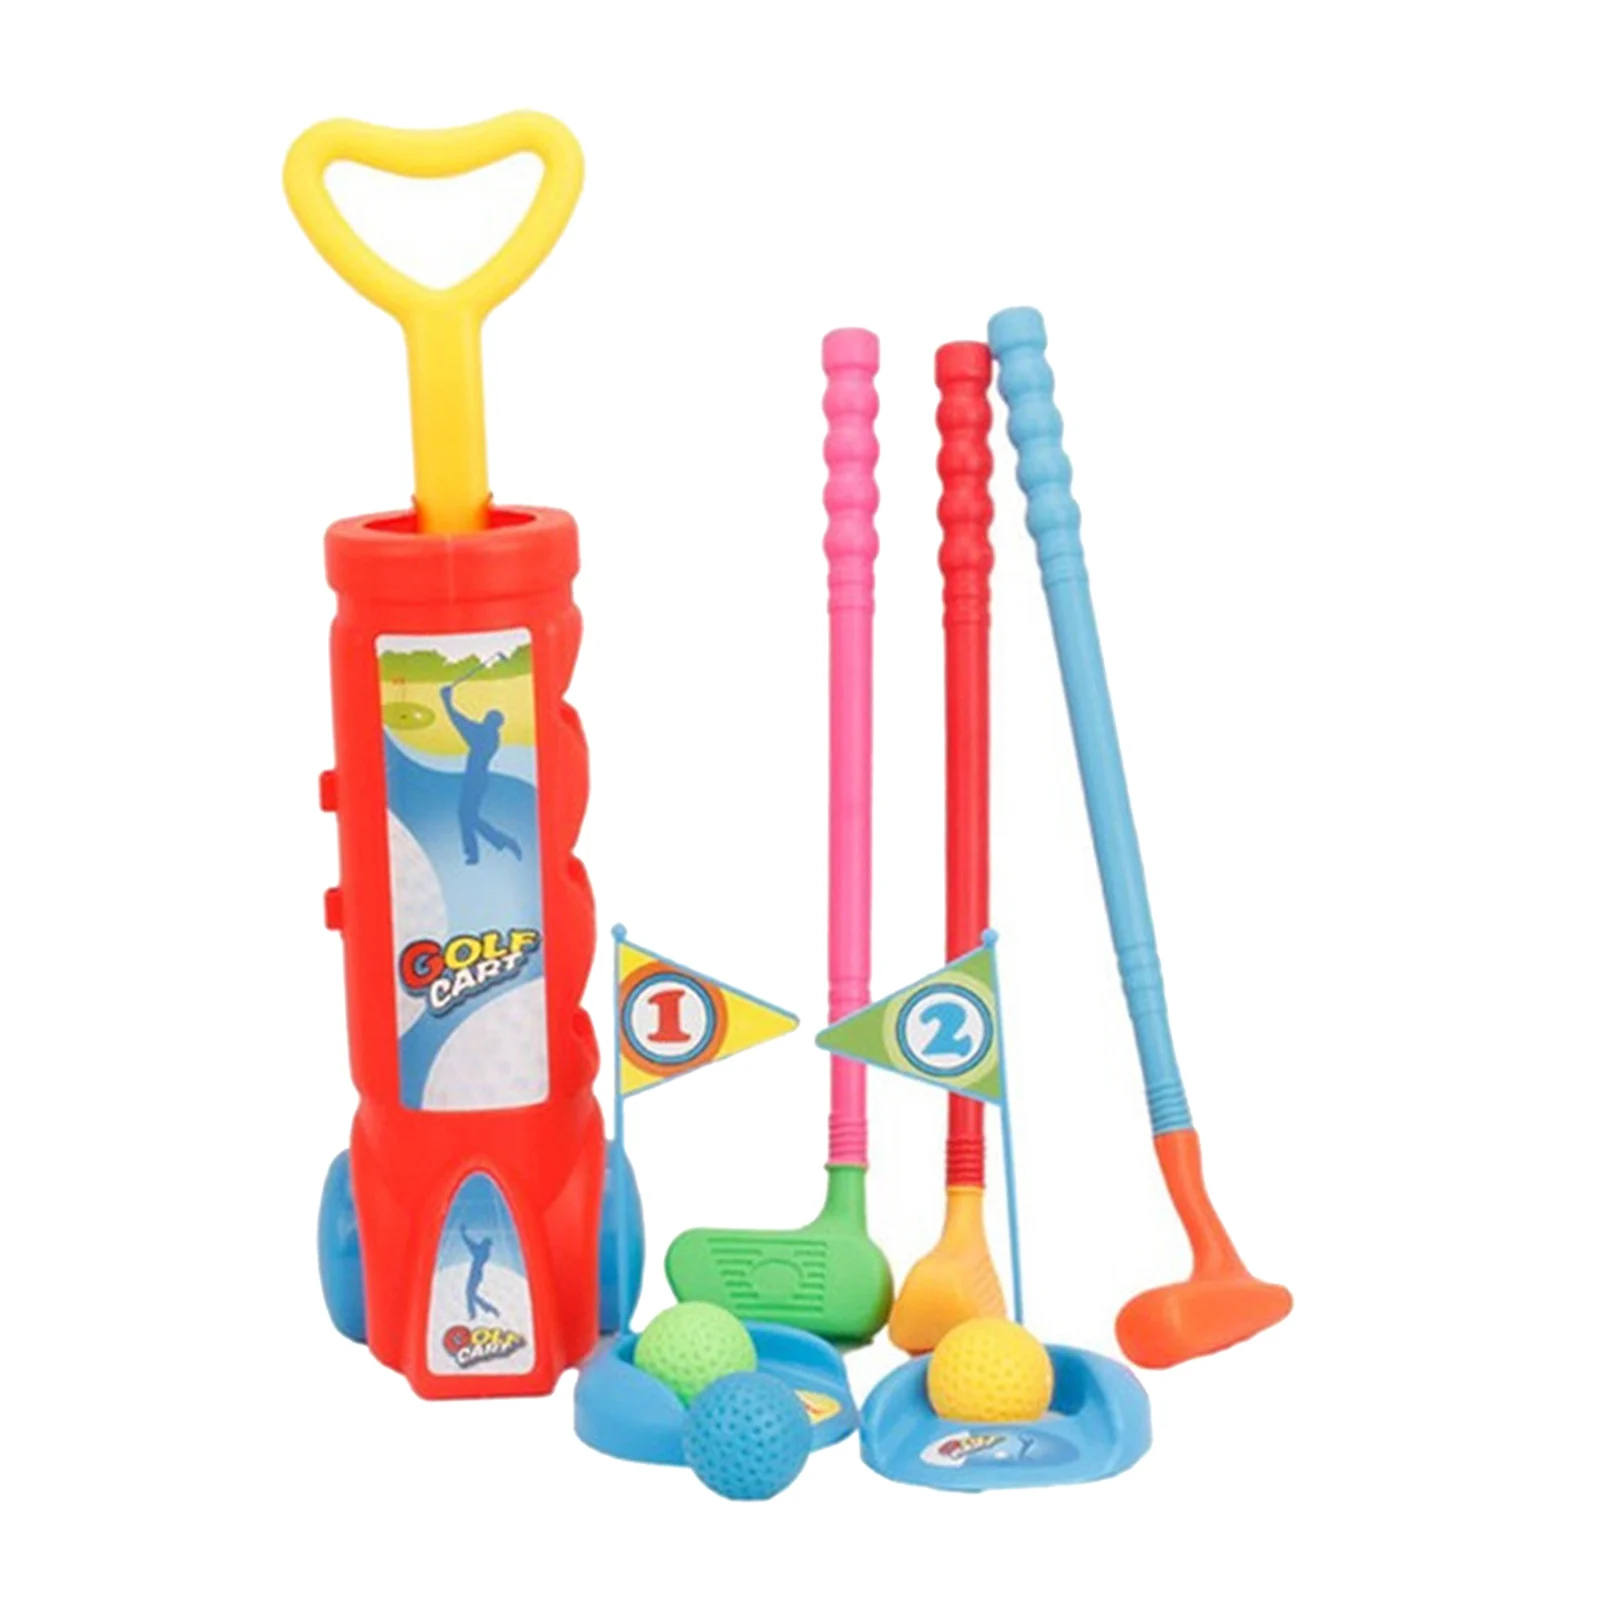 1 Set Child Golfer Sports Game Mini Plastic Toy Kids Children Pro Home Outdoor Indoor Small Golfs Training Club Party